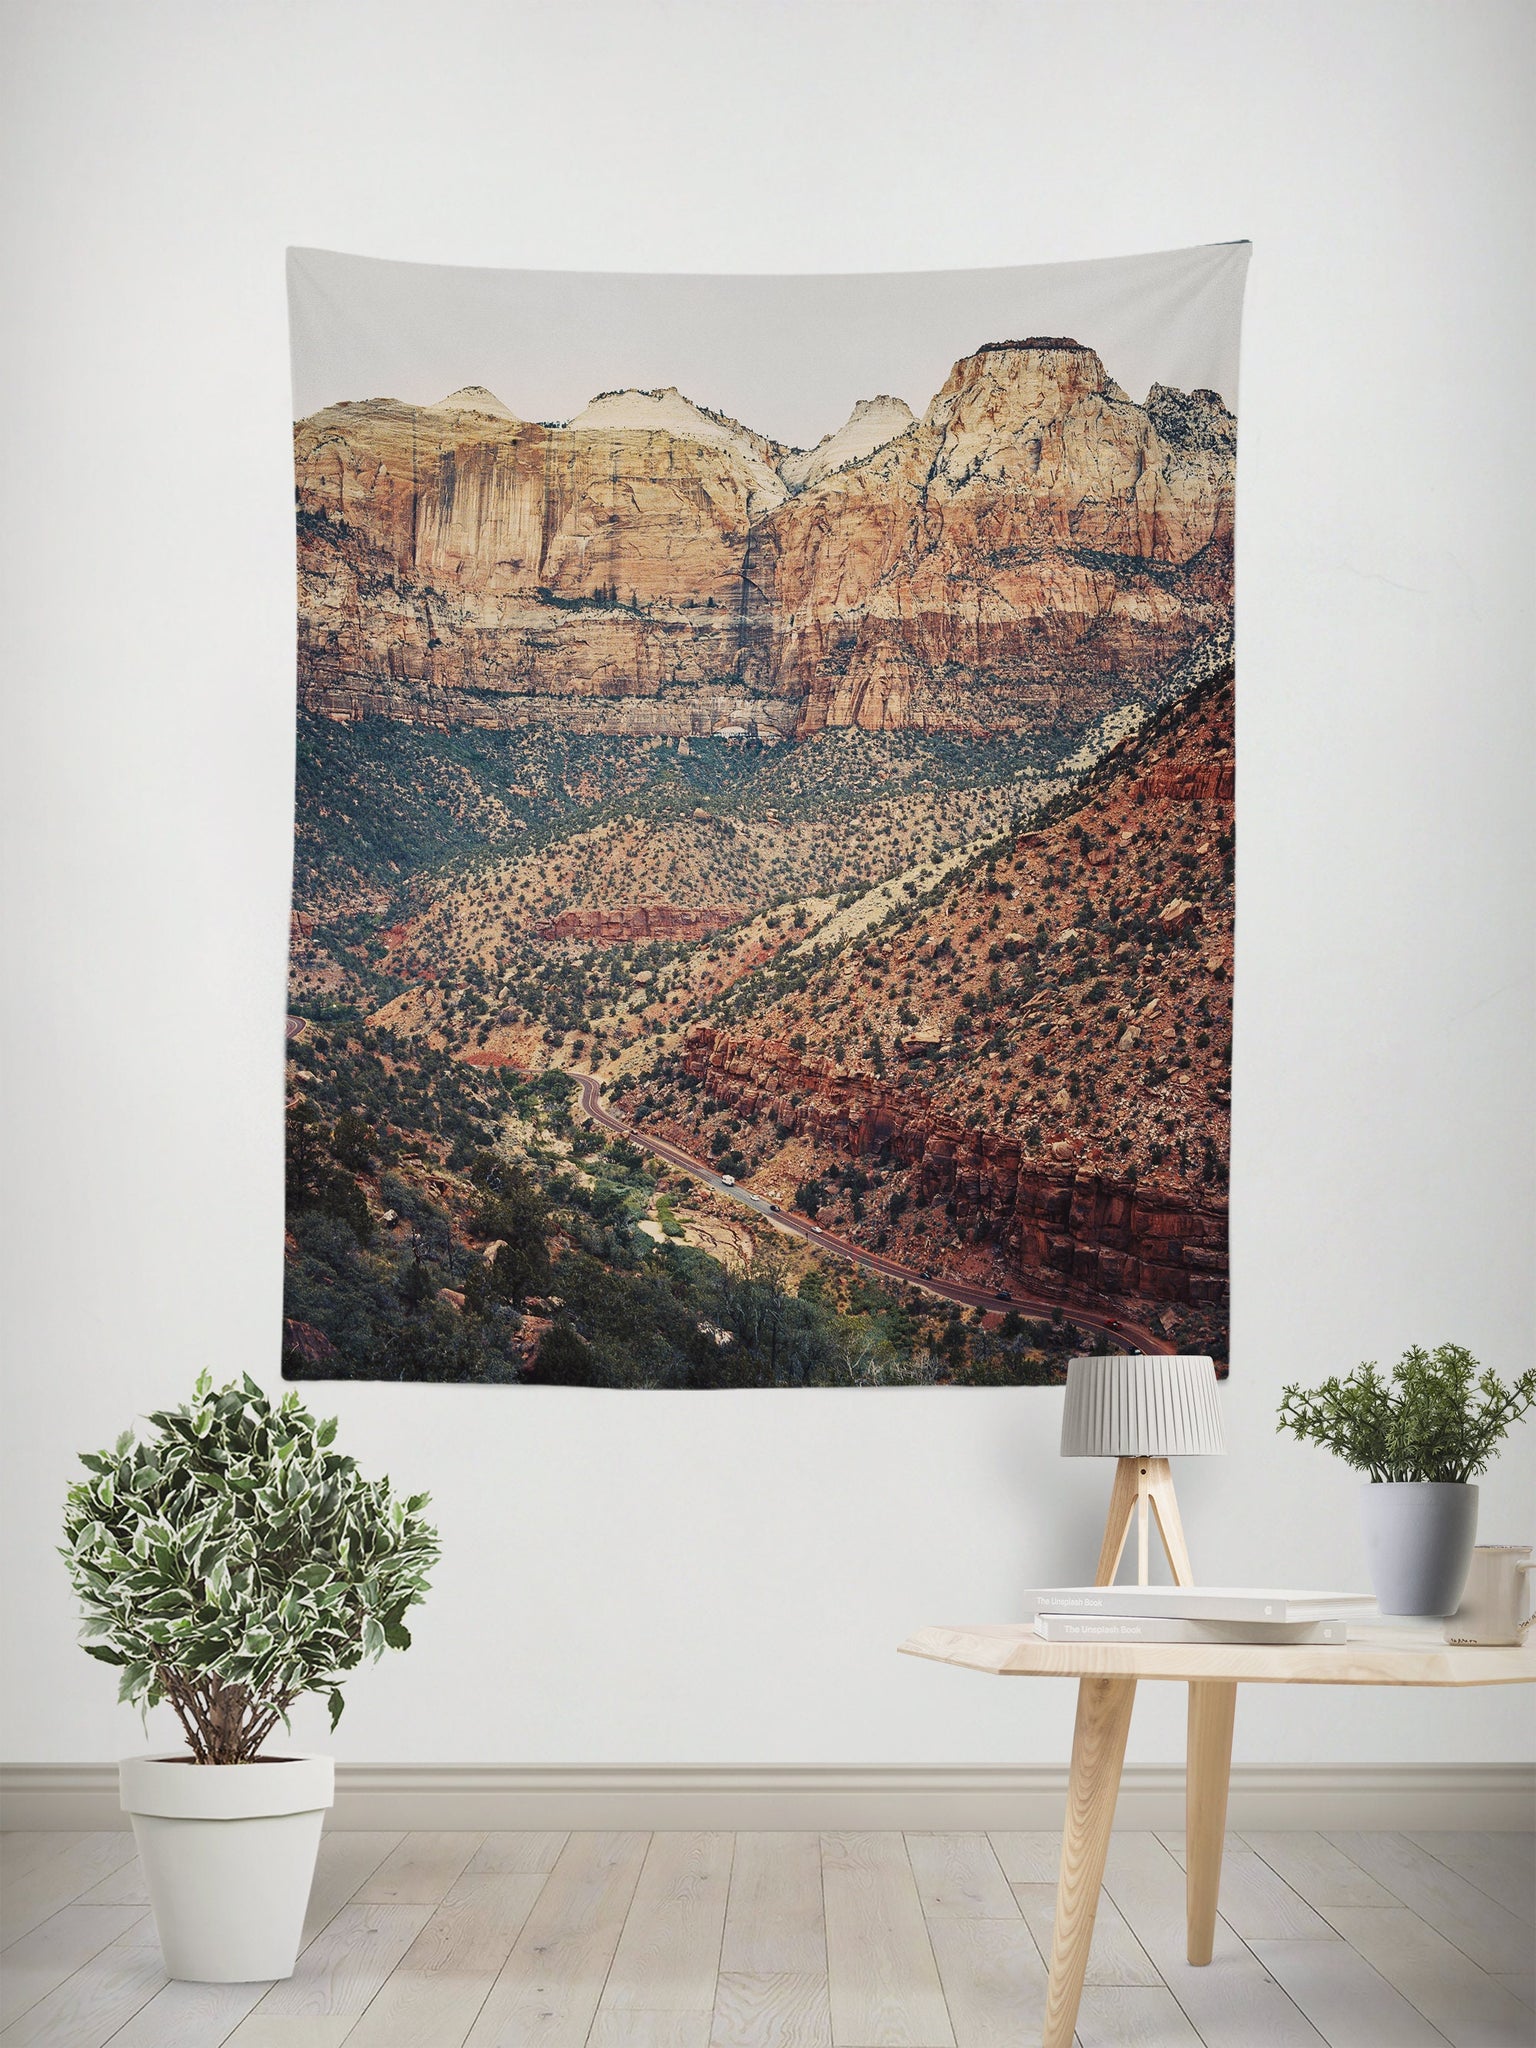 Road to Zion Wall Tapestry Southwest Decor - Decorative